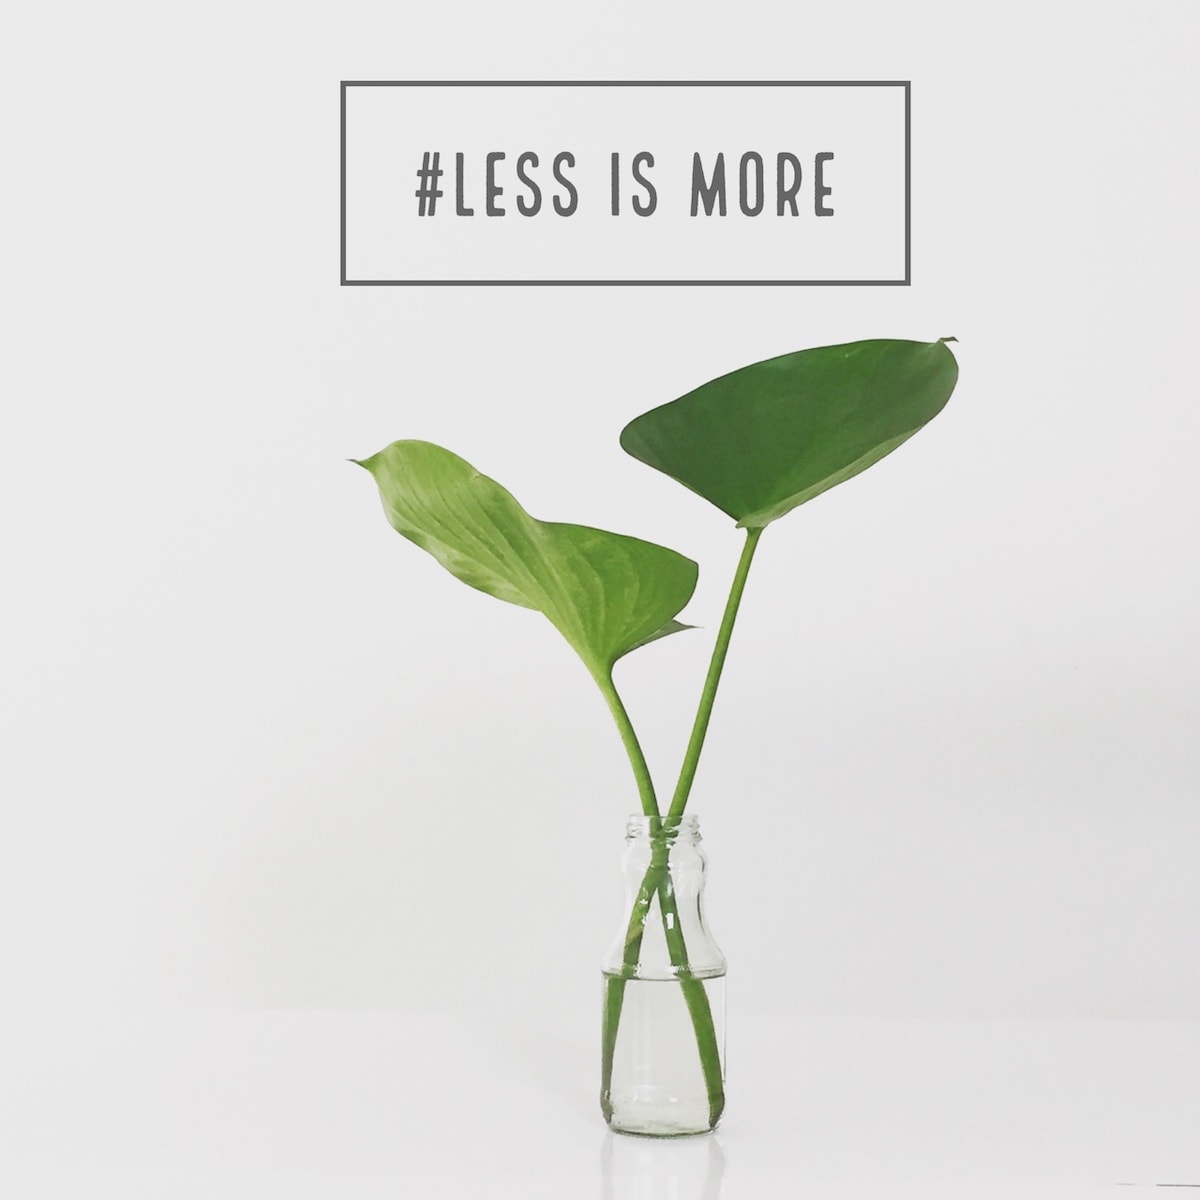 A minimalist plant with the phrase "less is more" behind it